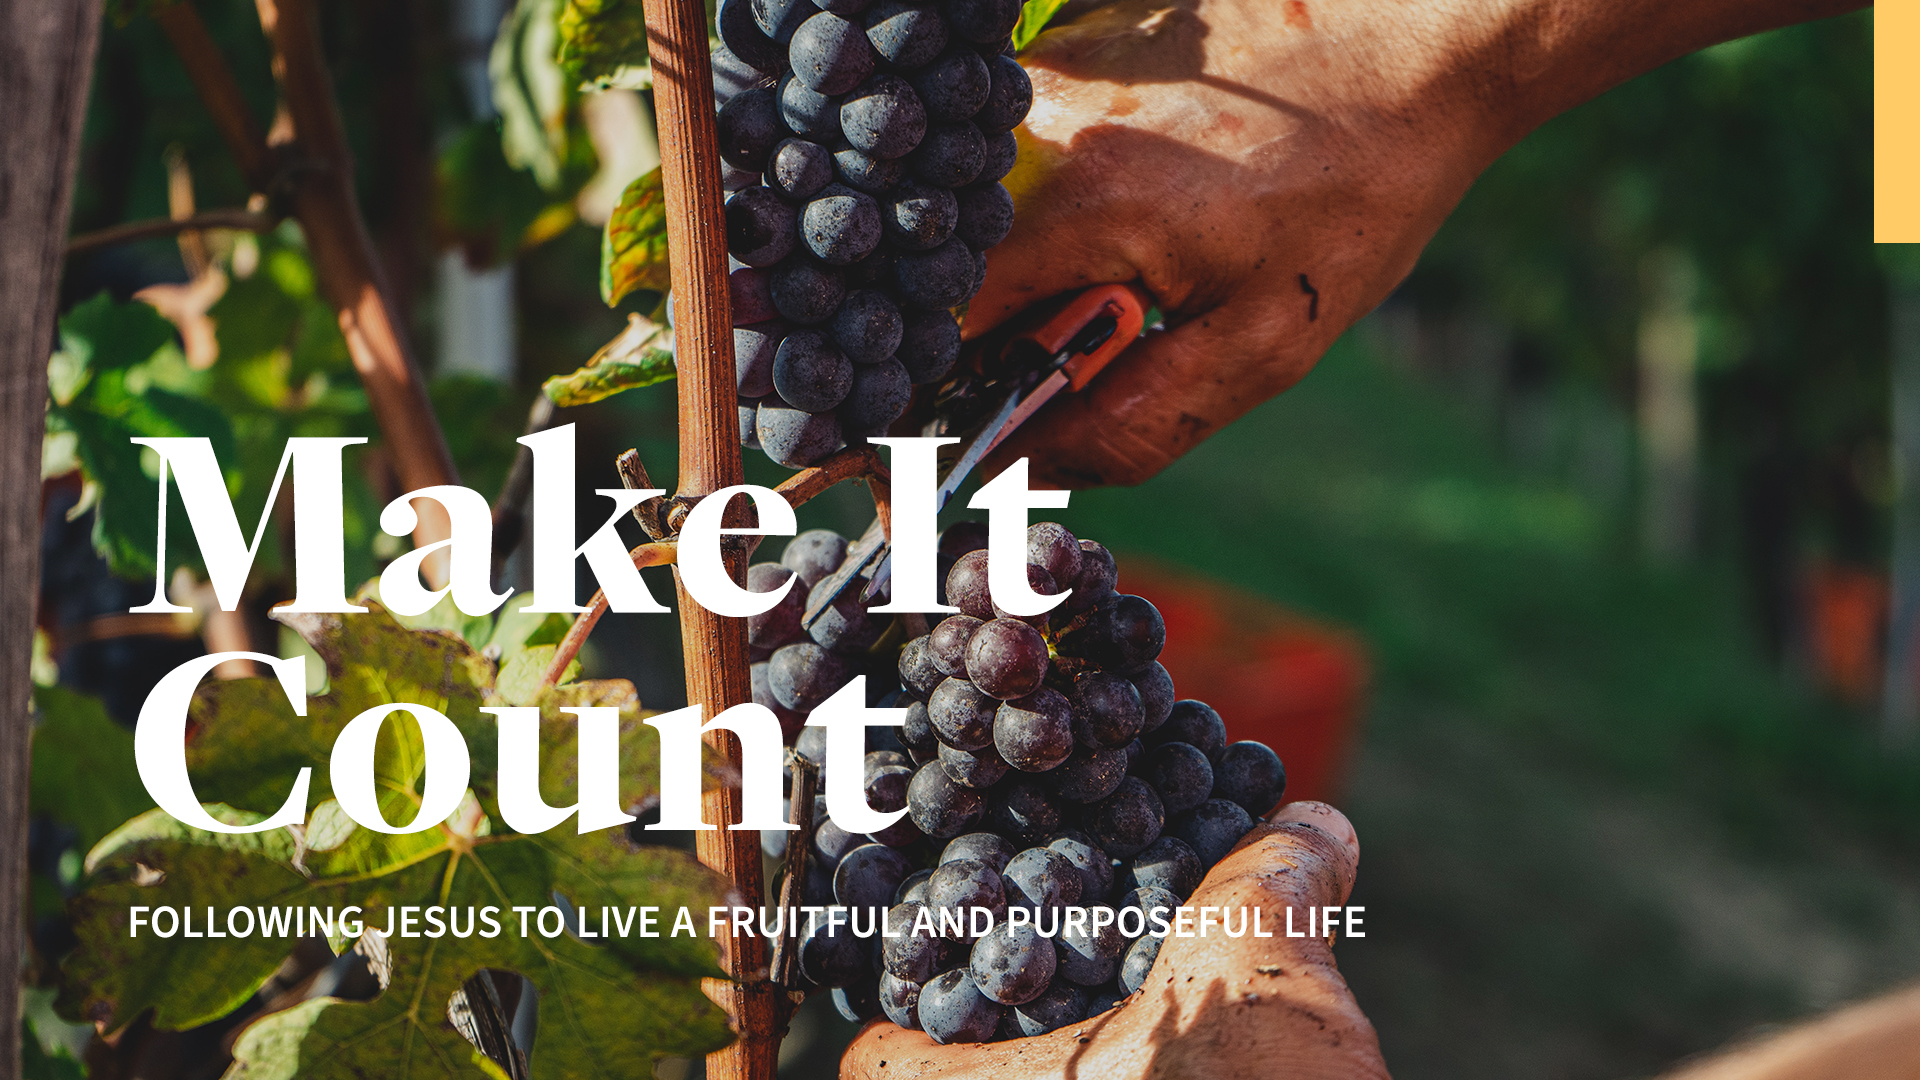 Make It Count: Following Jesus to live a fruitful and purposeful life